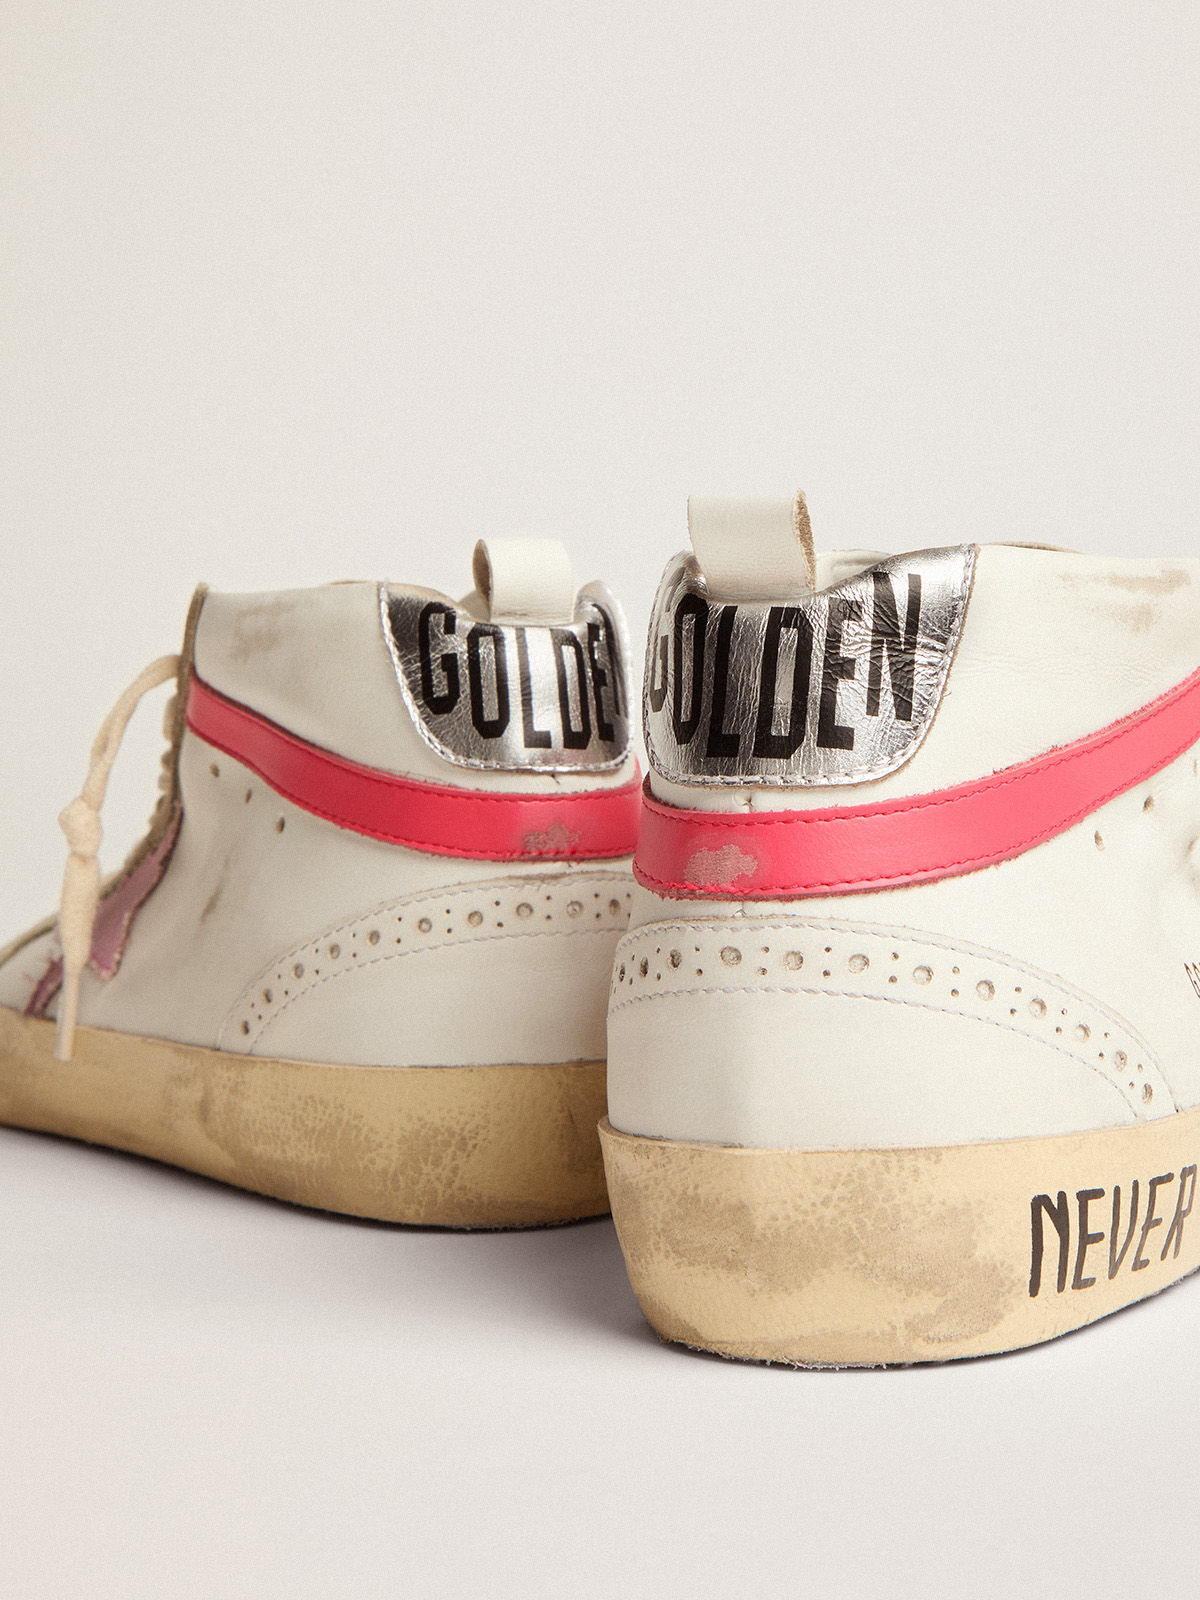 Mid Star sneakers in white leather with pink star and black lettering |  Golden Goose